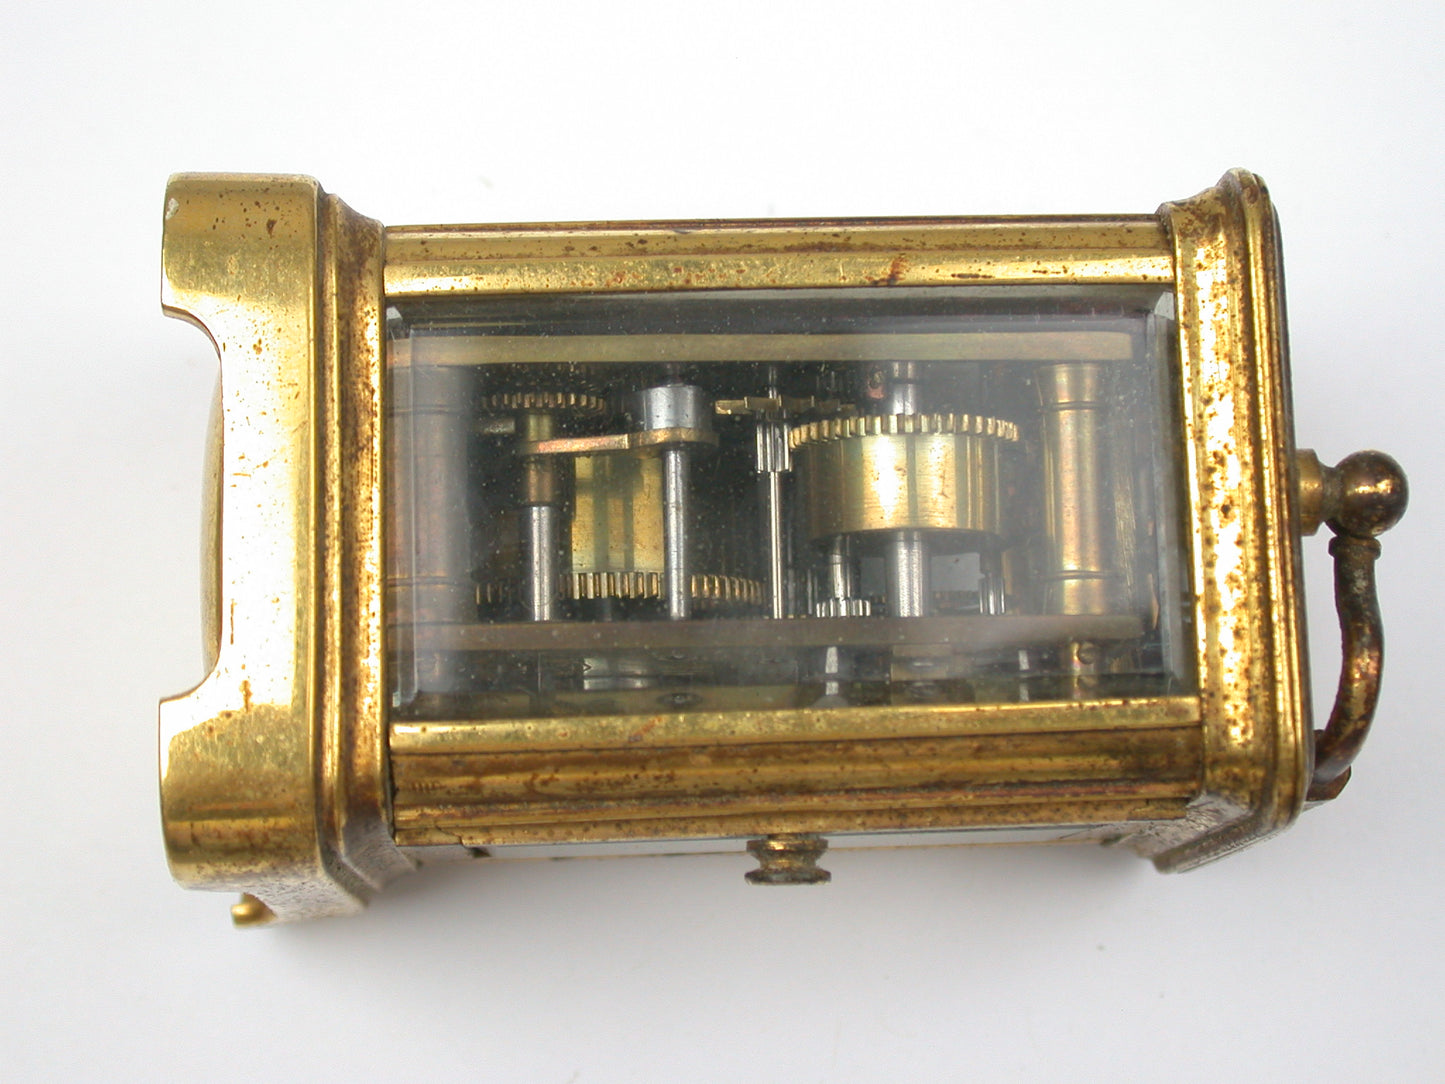 Lot 7- French Miniature Time & Alarm, Brass & Glass Carriage Clock